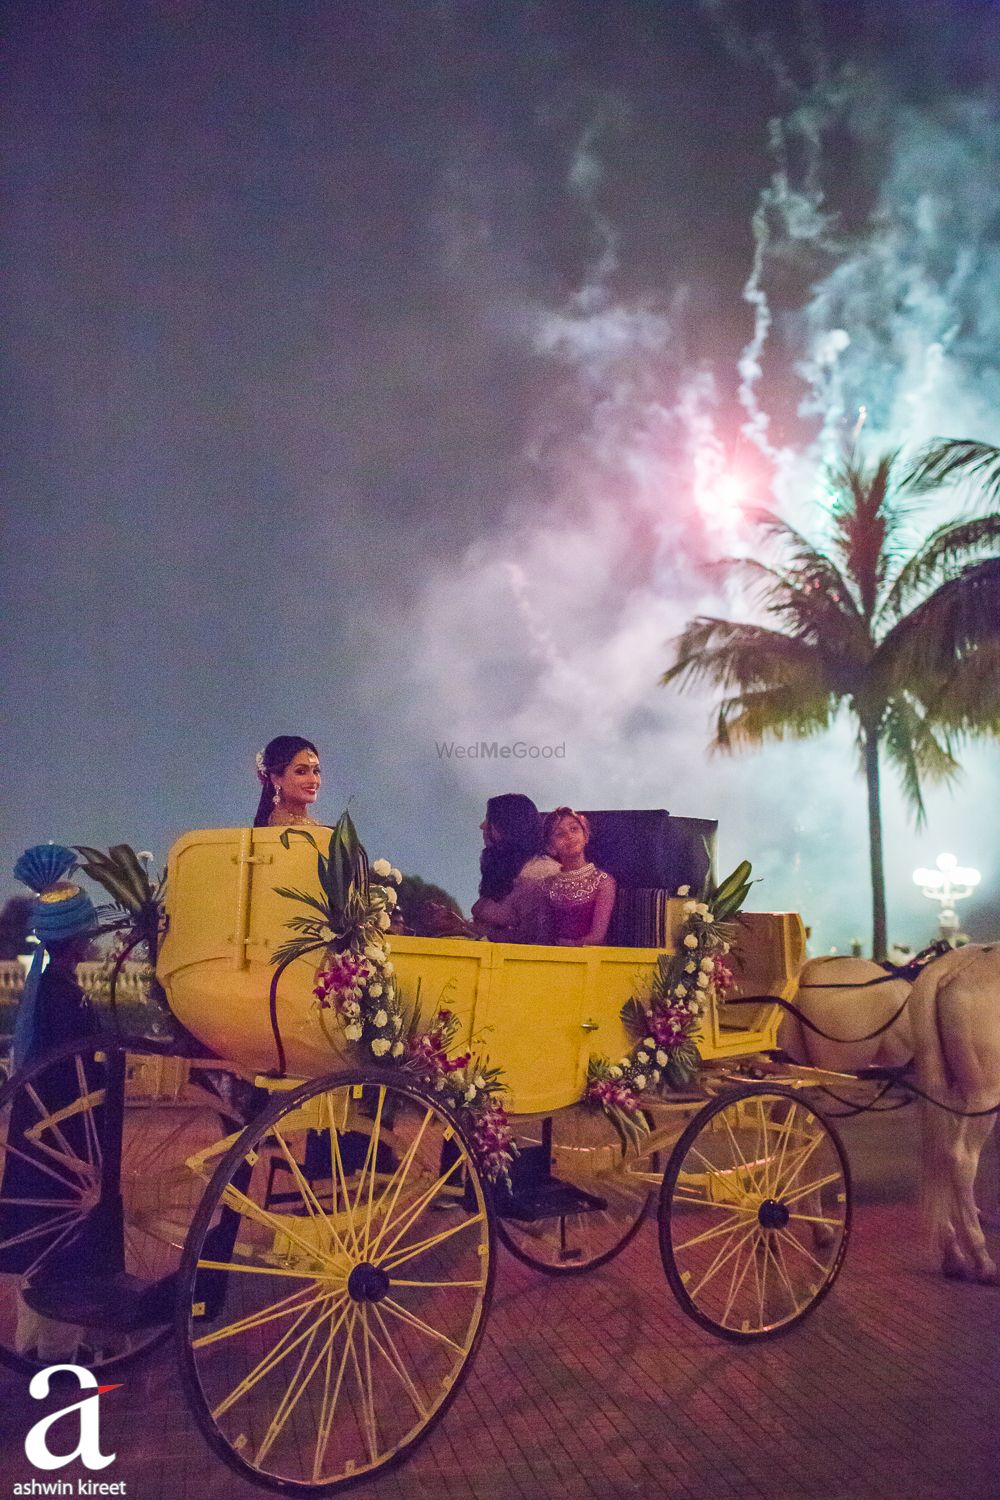 Photo of South Indian bride entry on yellow chariot with florals